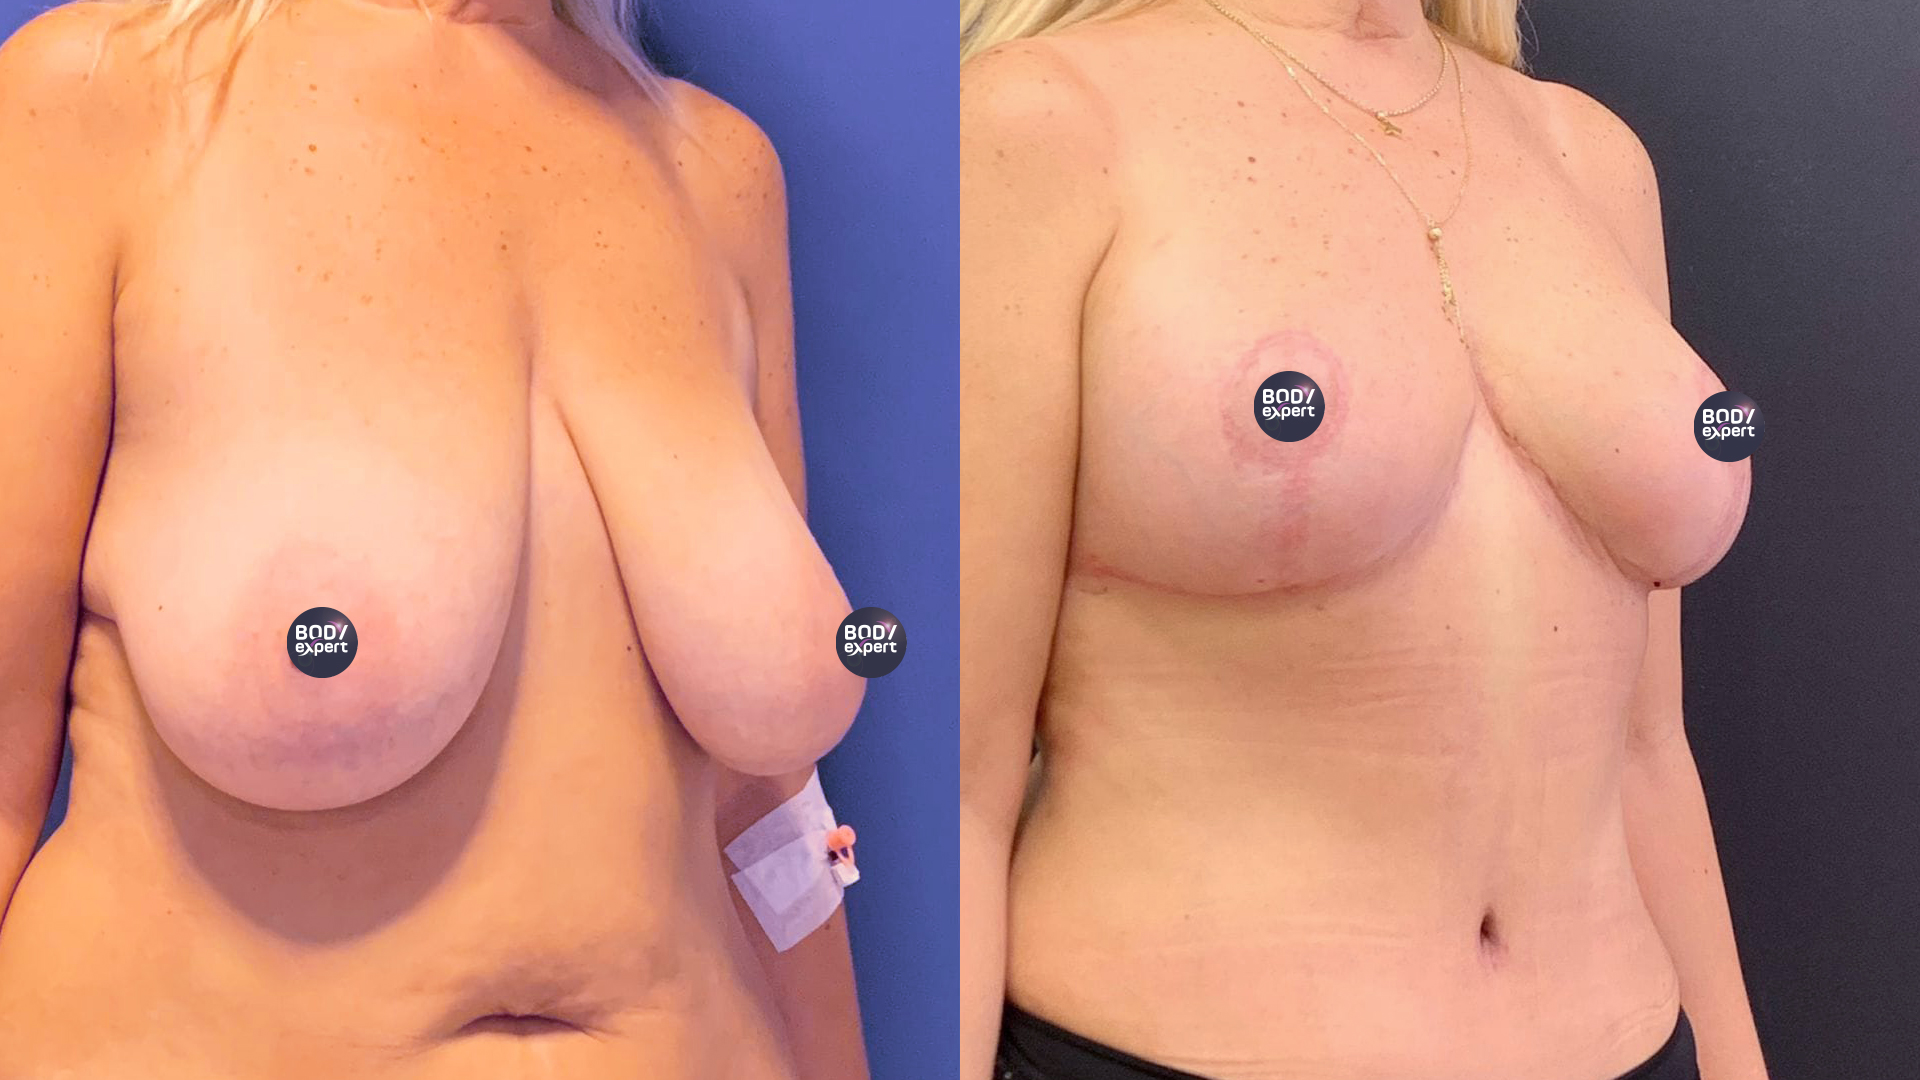 Breast lift and liposuction results